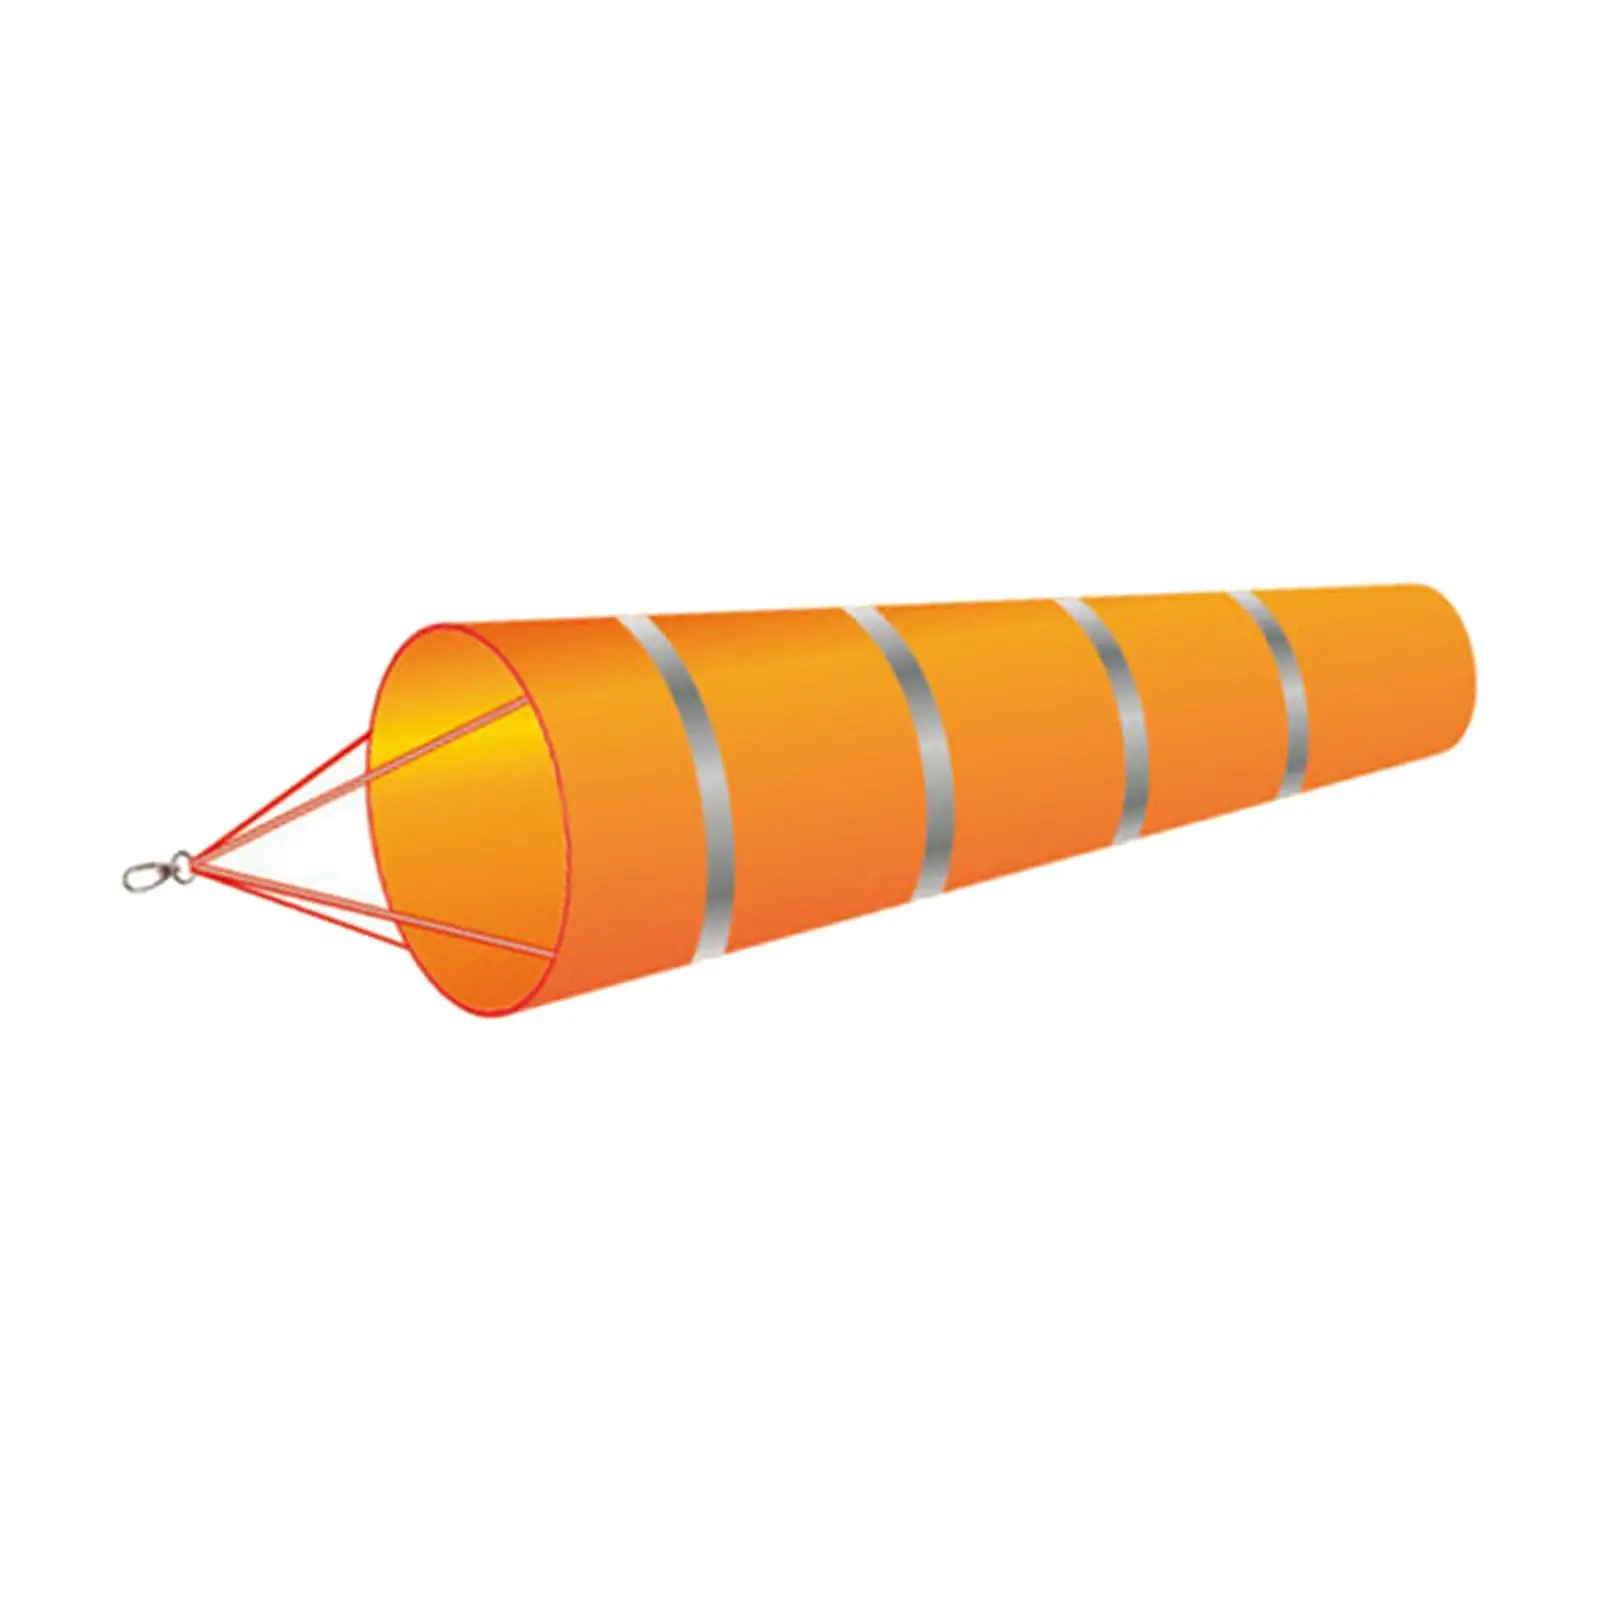 200cm Wind Sock Bag with Reflective Belt Grommet Durable for Outdoors Farm